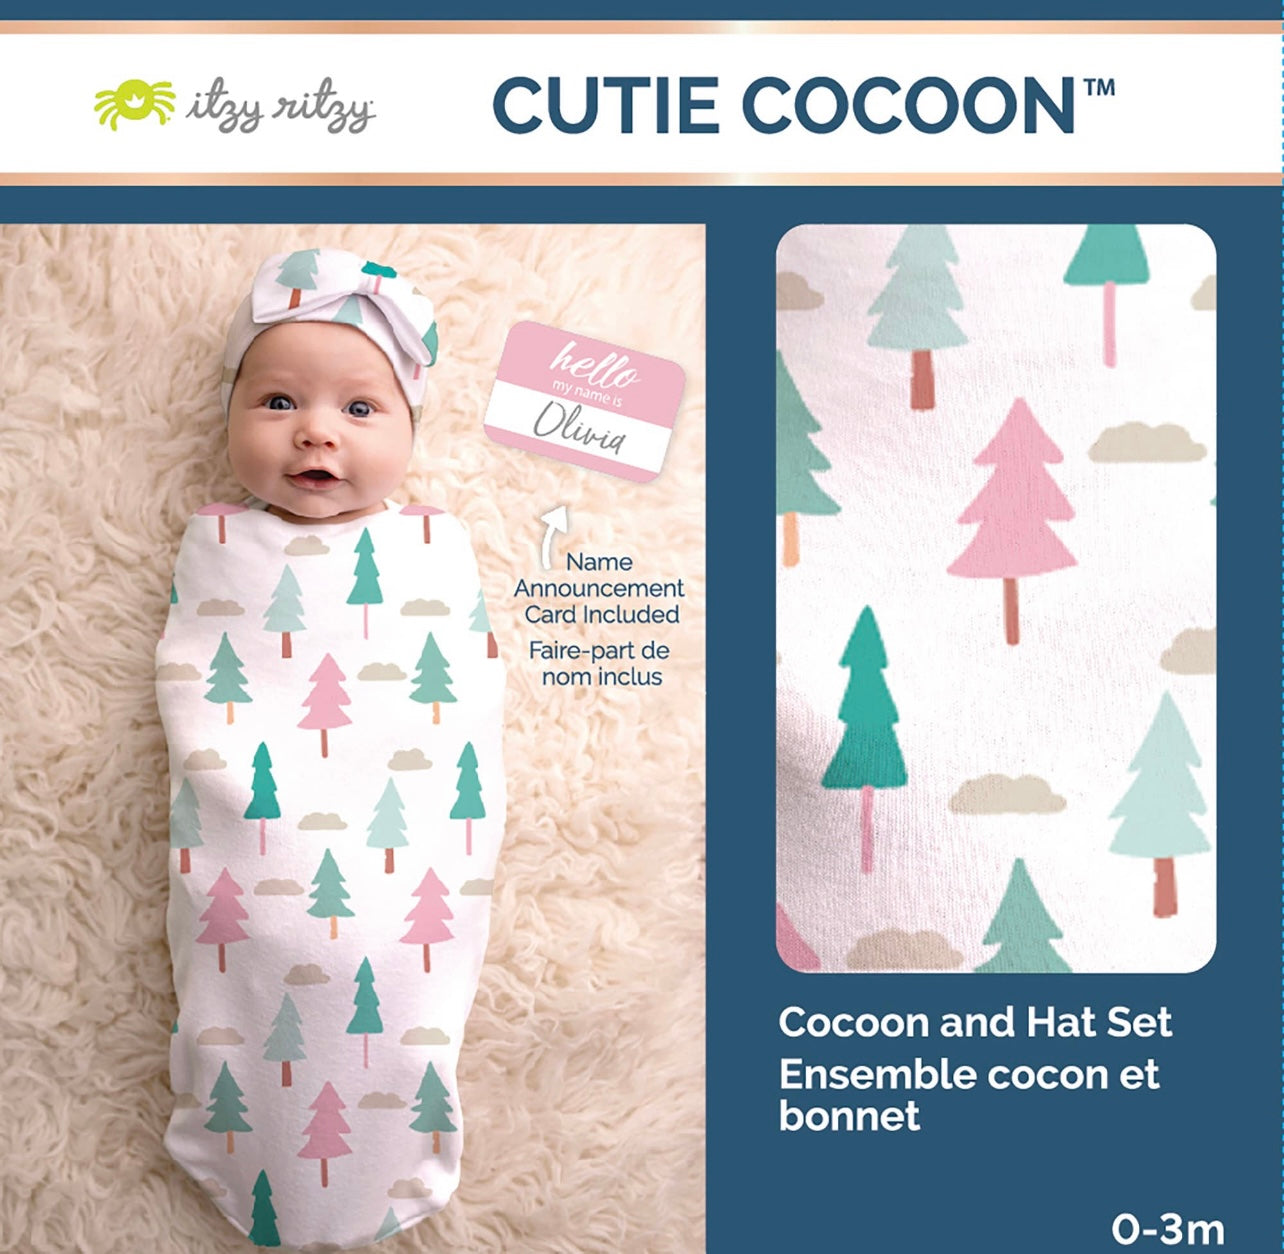 Cutie Cocoon Matching Cocoon & Hat Sets (7 colors)